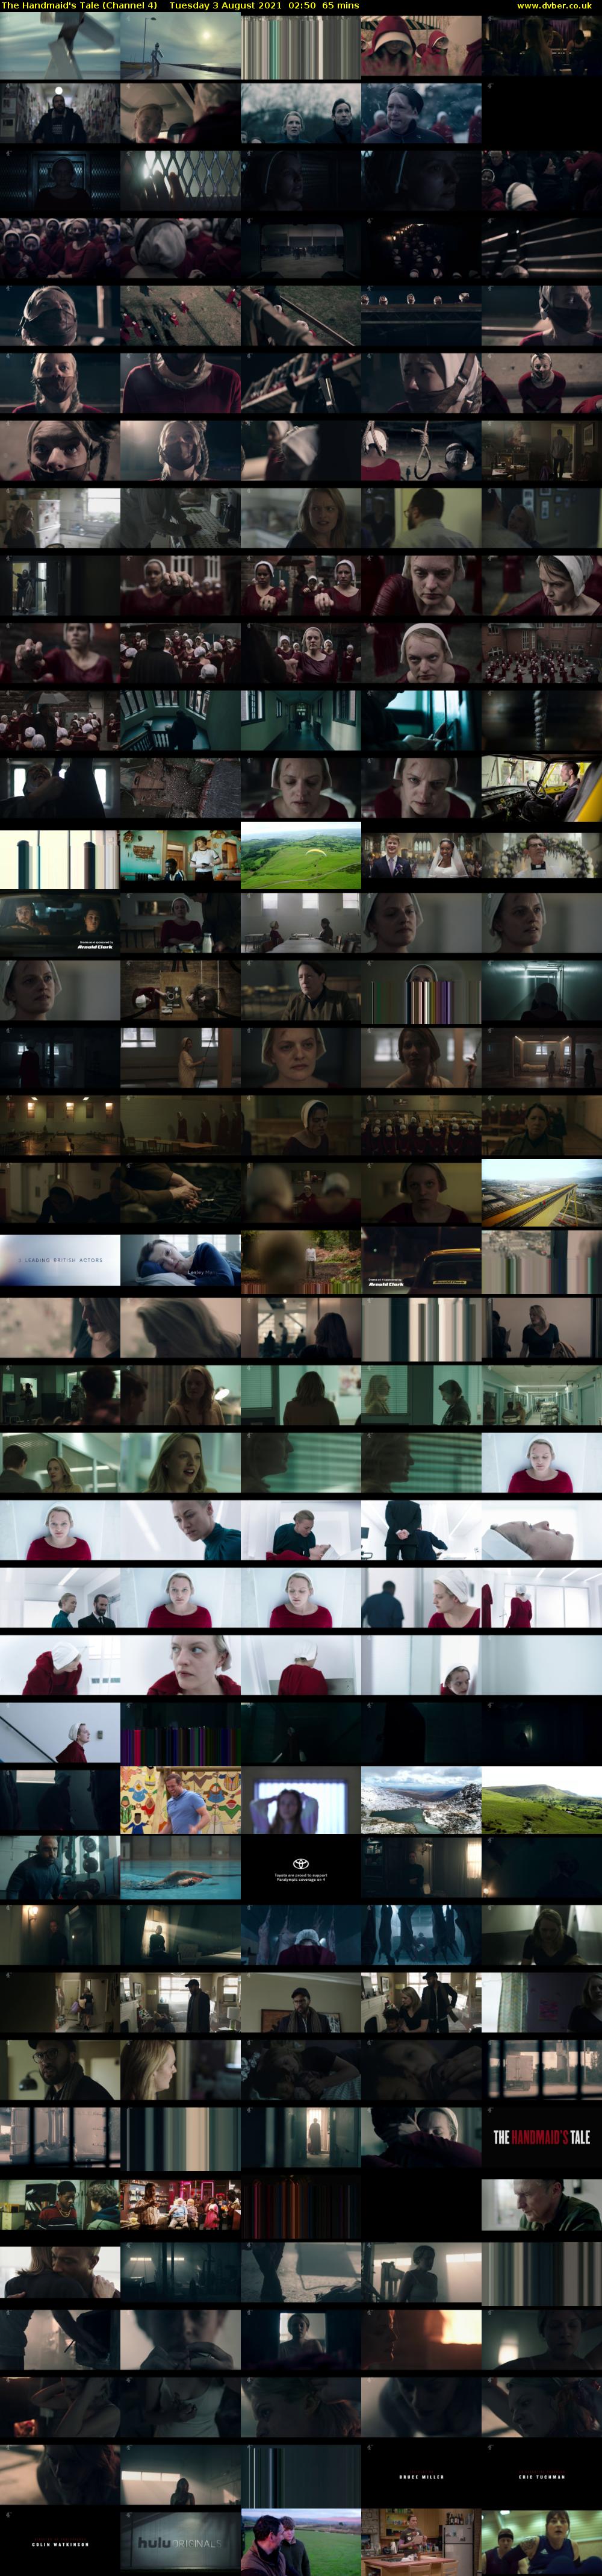 The Handmaid's Tale (Channel 4) Tuesday 3 August 2021 02:50 - 03:55